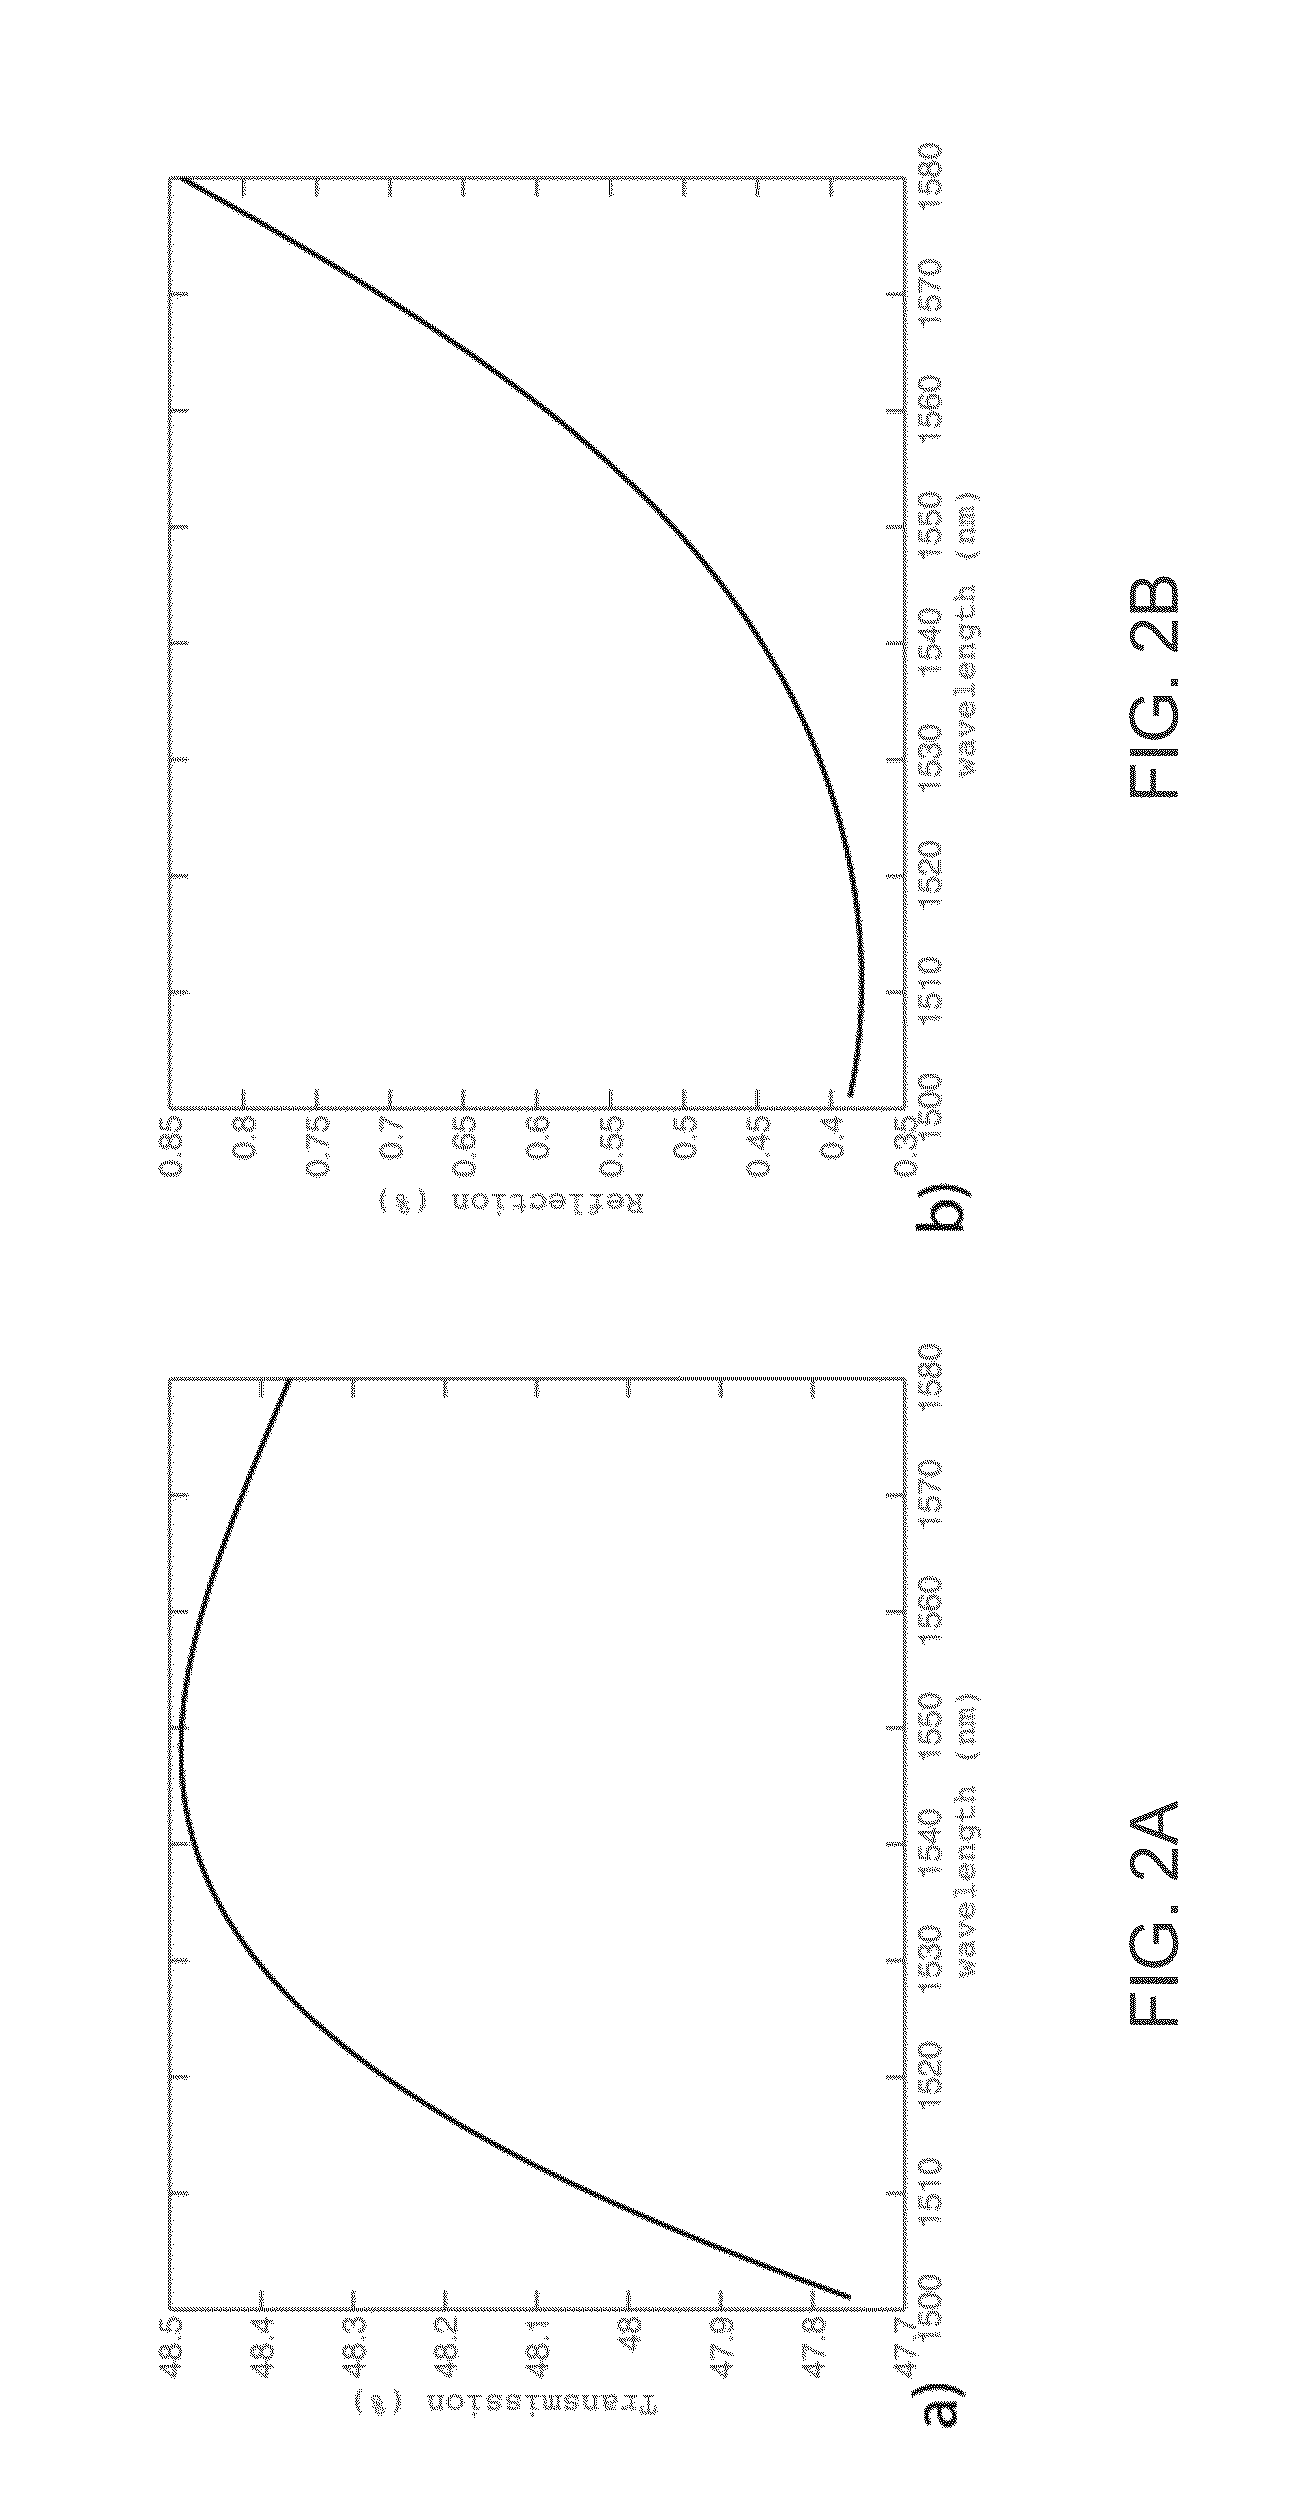 Methods for designing photonic devices